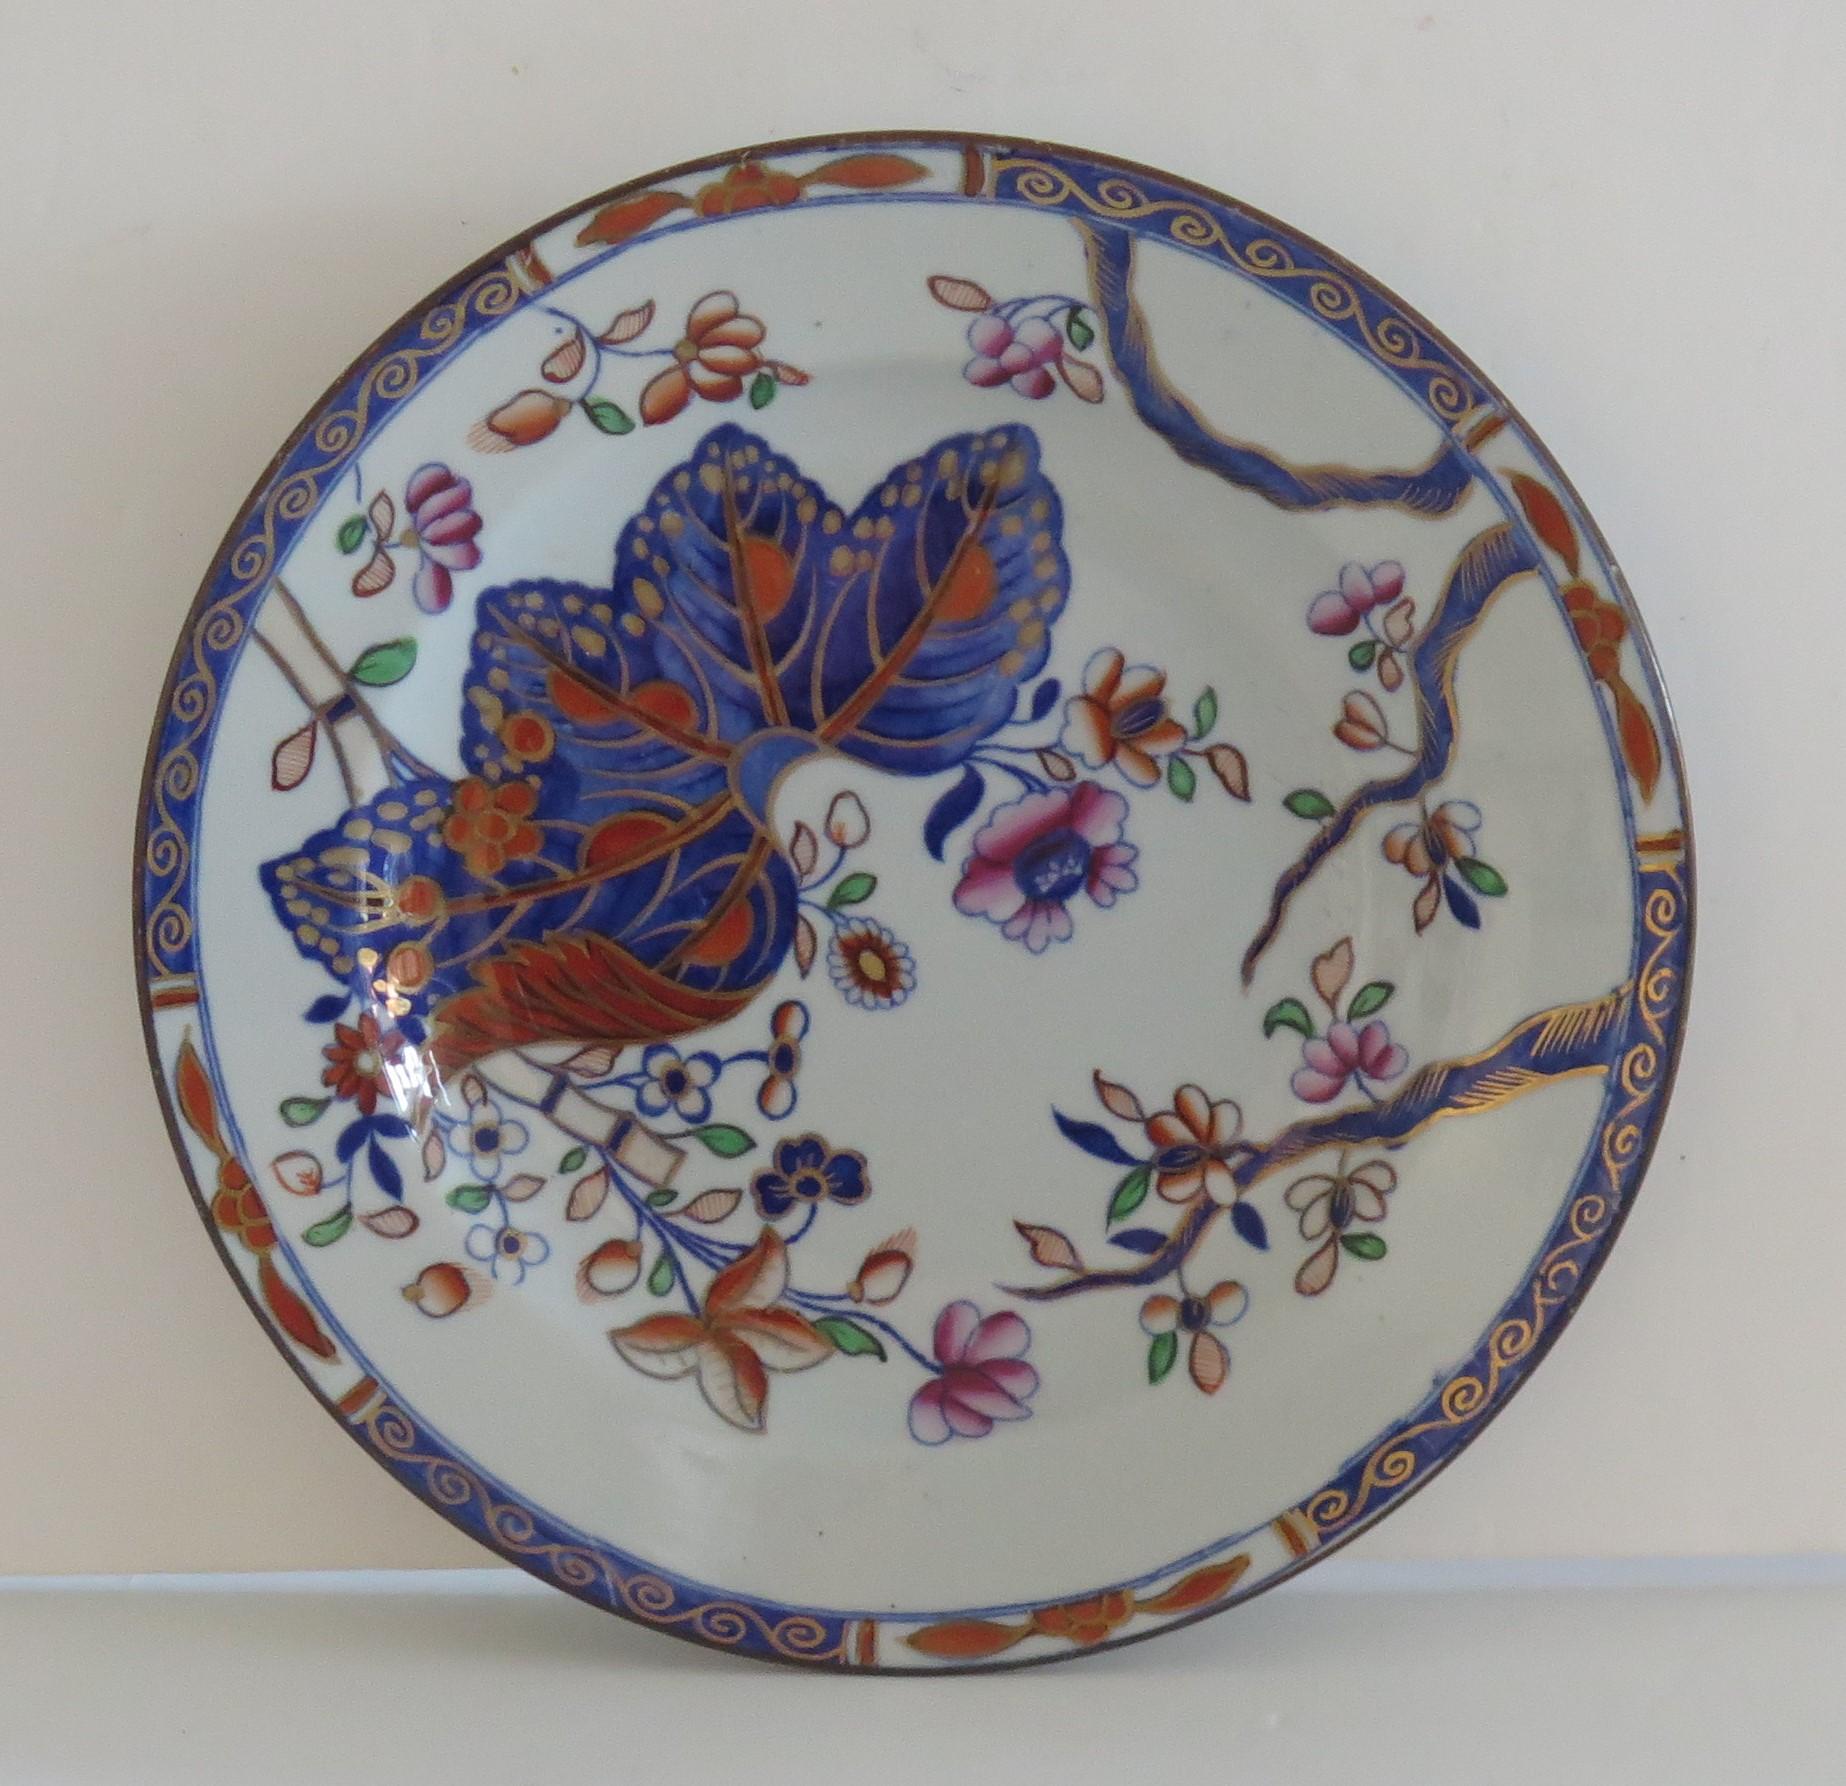 Chinoiserie Georgian Spode Stone China Side Plate or Dish in Tobacco Leaf Pattern No. 2061